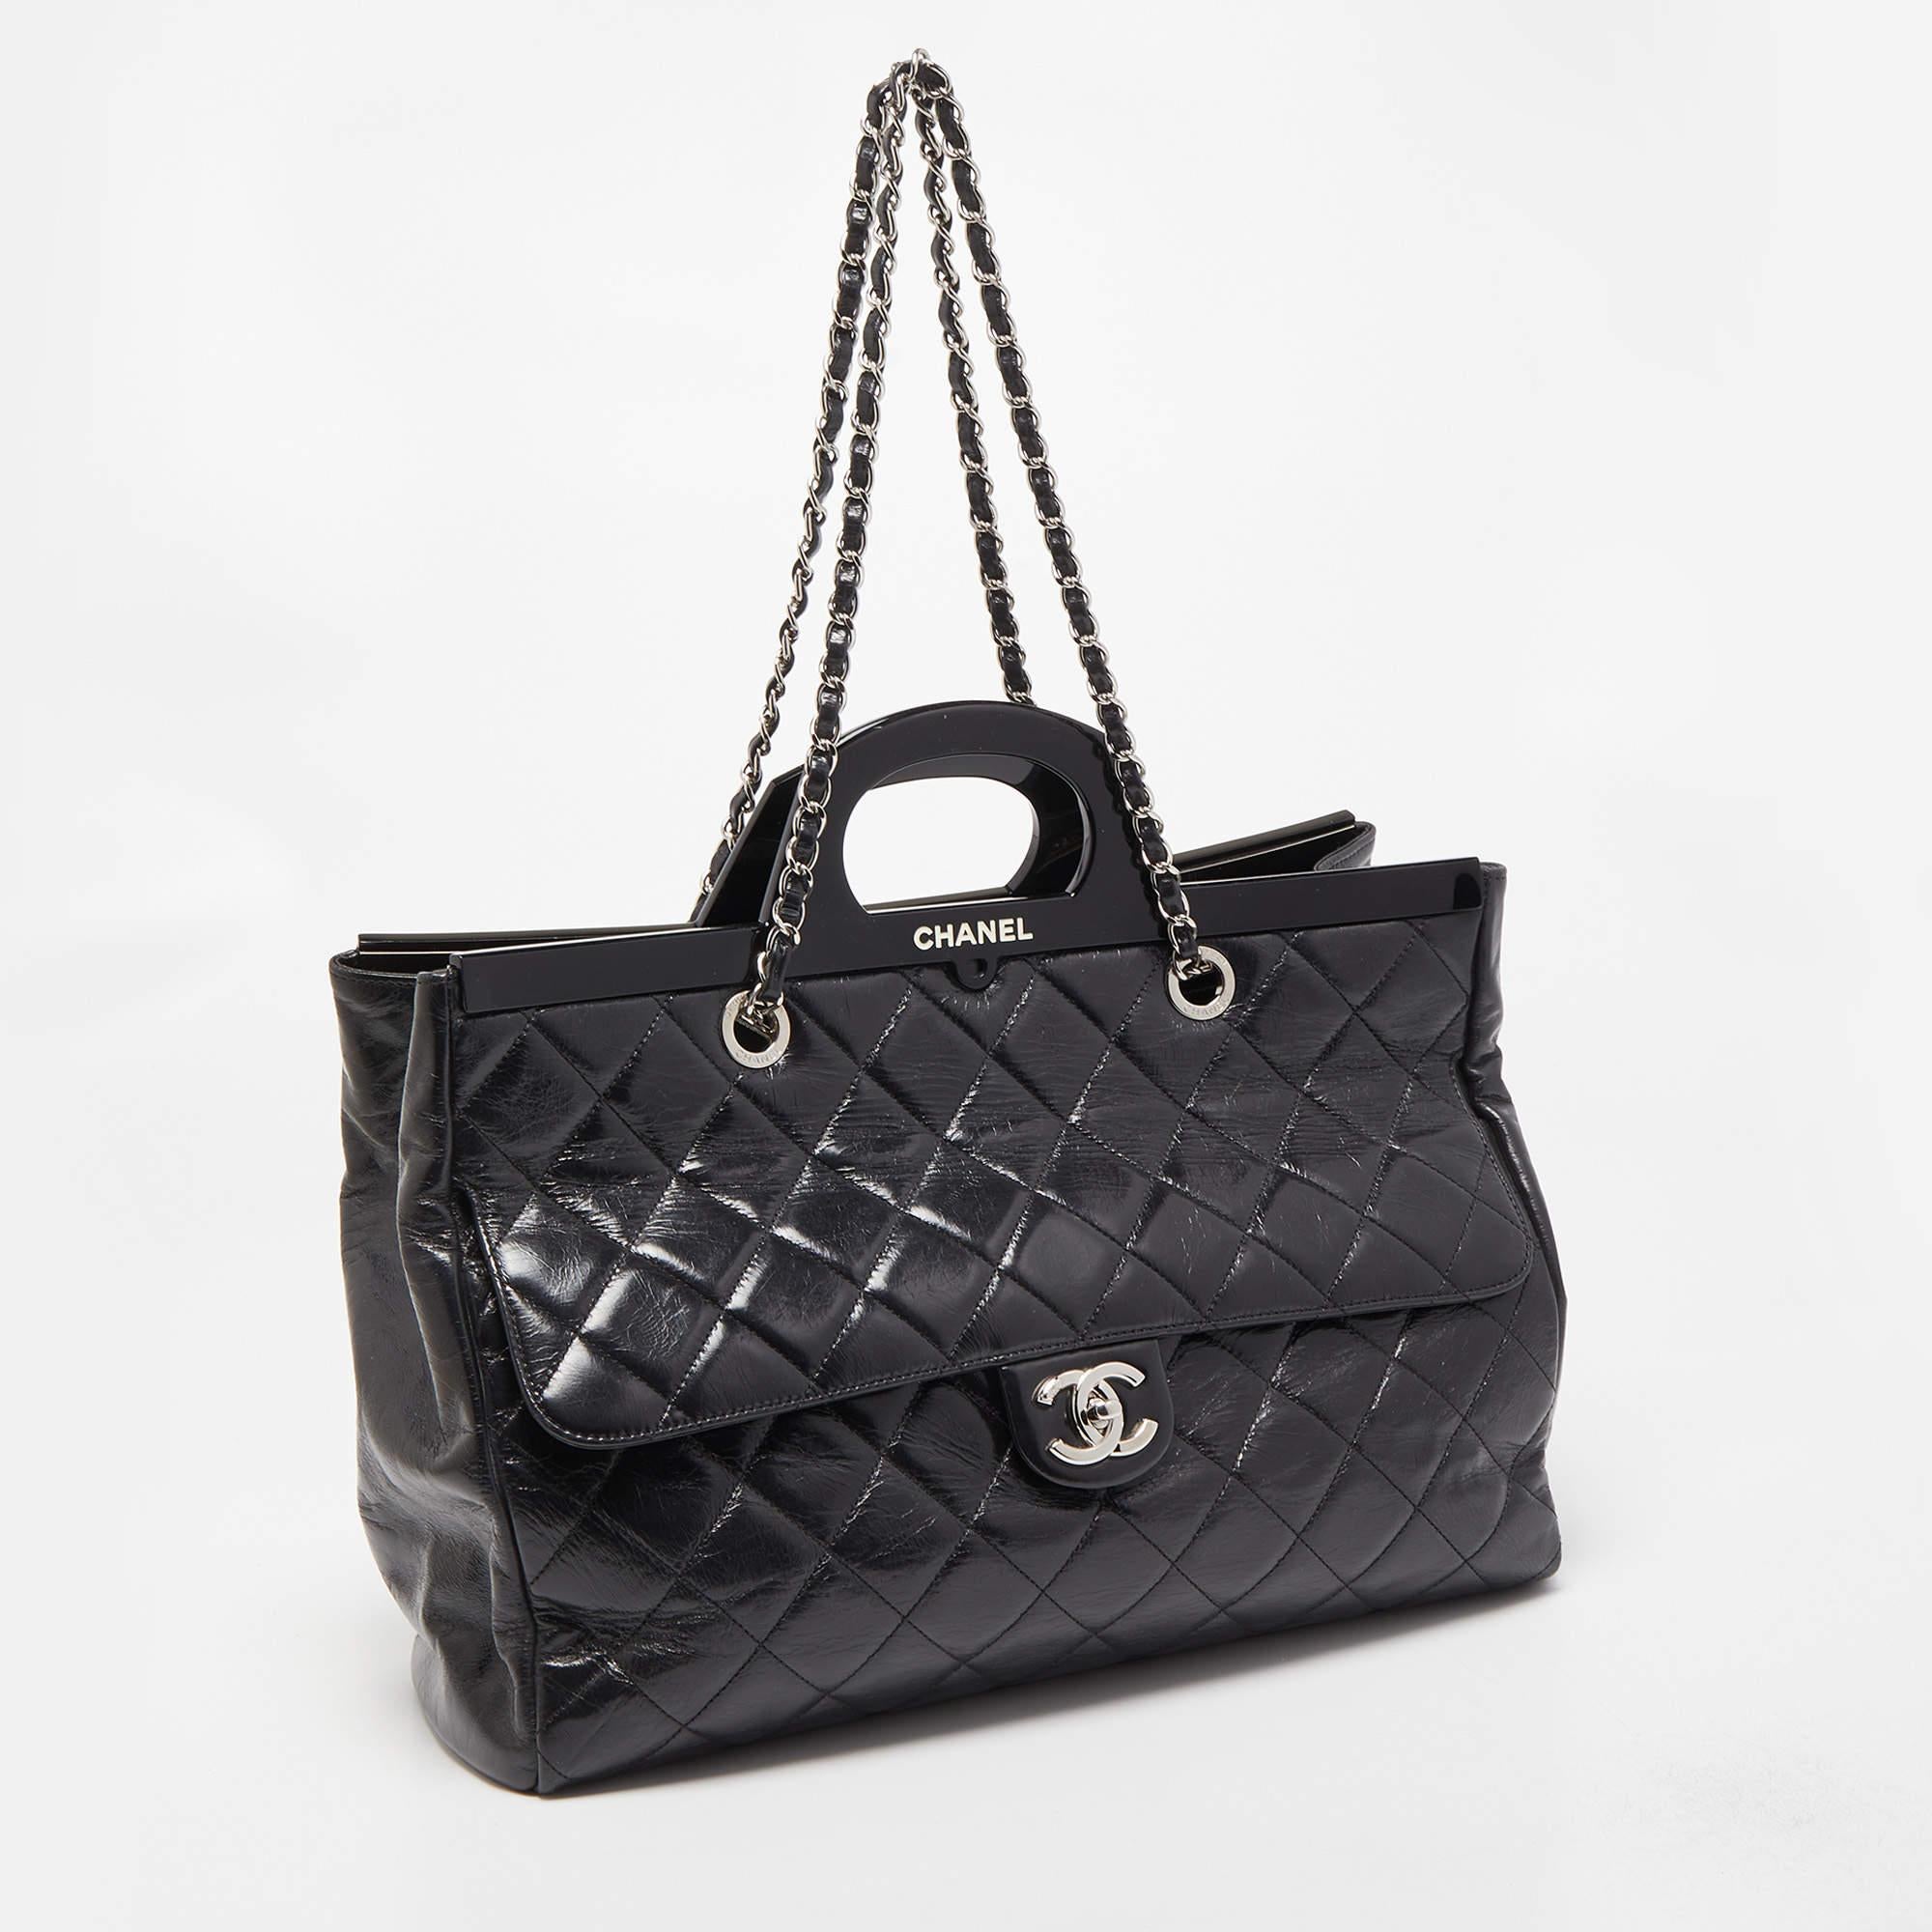 Chanel Black Quilted Glazed Leather Large CC Delivery Tote In Good Condition In Dubai, Al Qouz 2